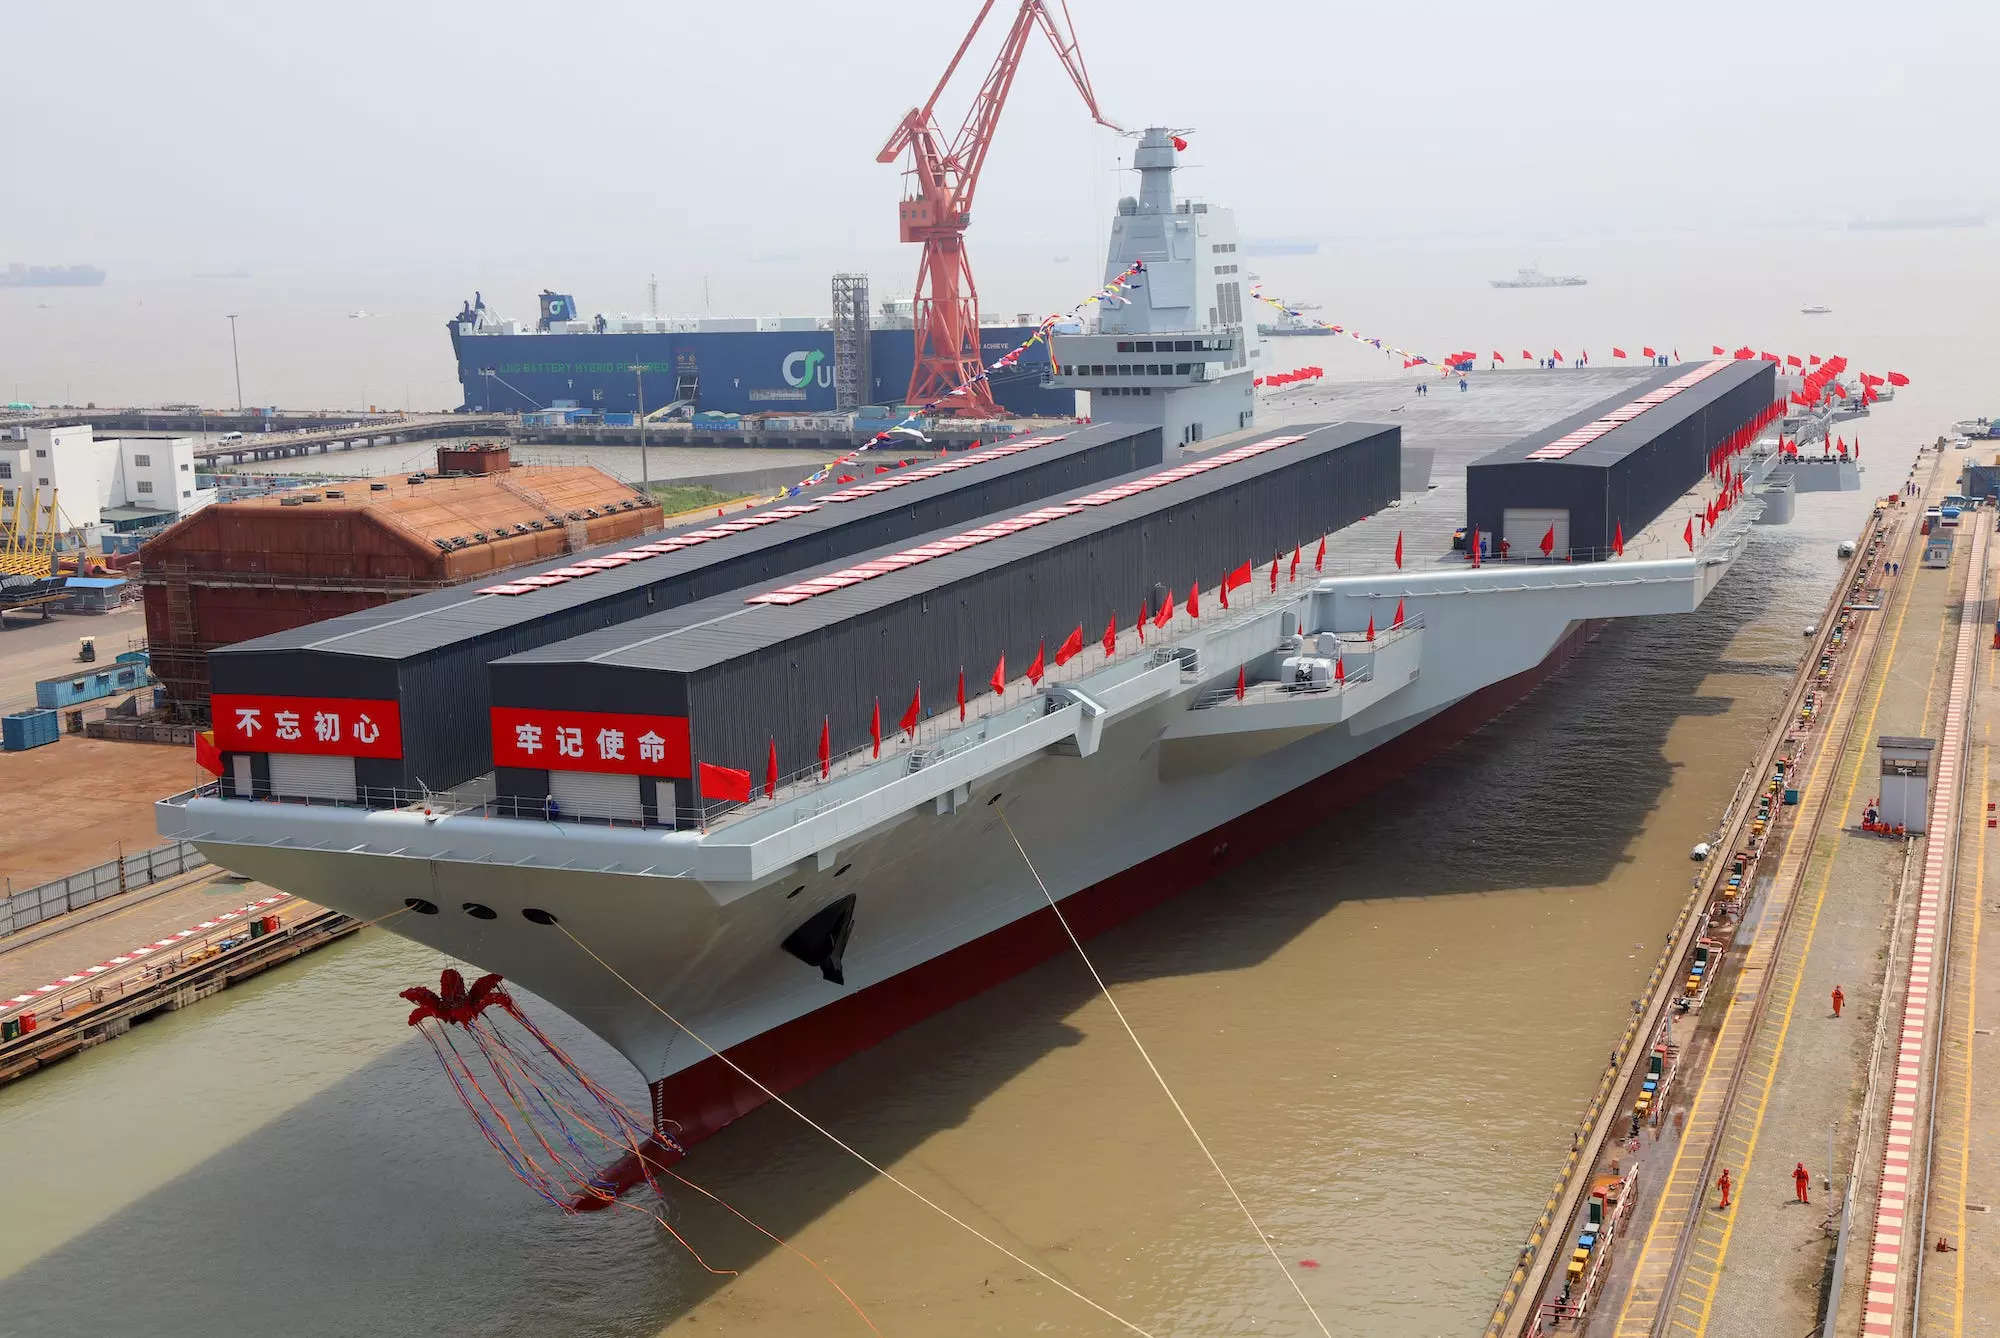 Asia's 2 biggest militaries are both getting new aircraft carriers. Here's how China's and India's latest flattops stack up.'s 2 biggest militaries are both getting new aircraft carriers. Here's how China's and India's latest flattops stack up.